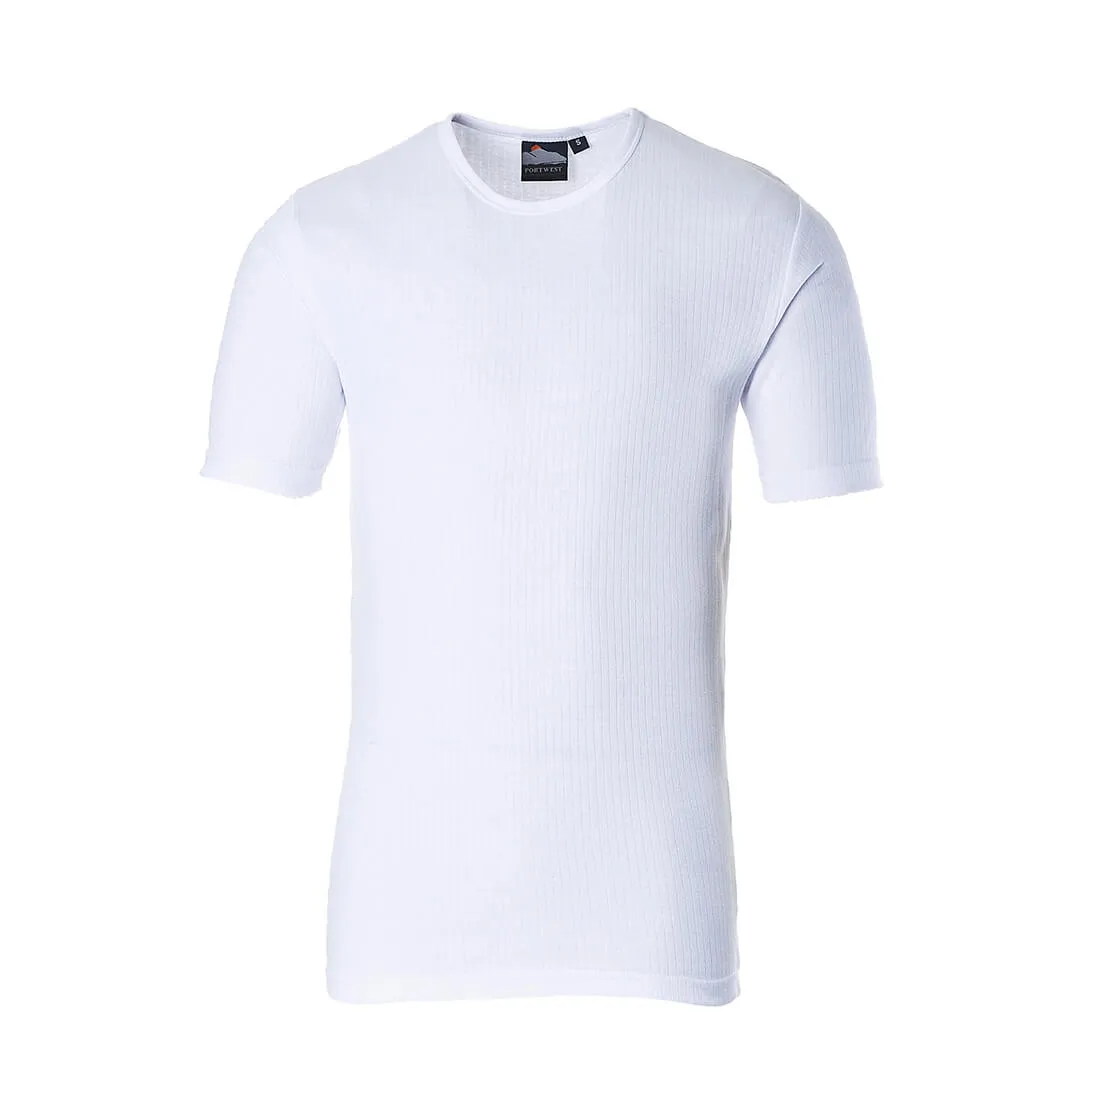 Portwest Thermal Short Sleeve T Shirt - White, M